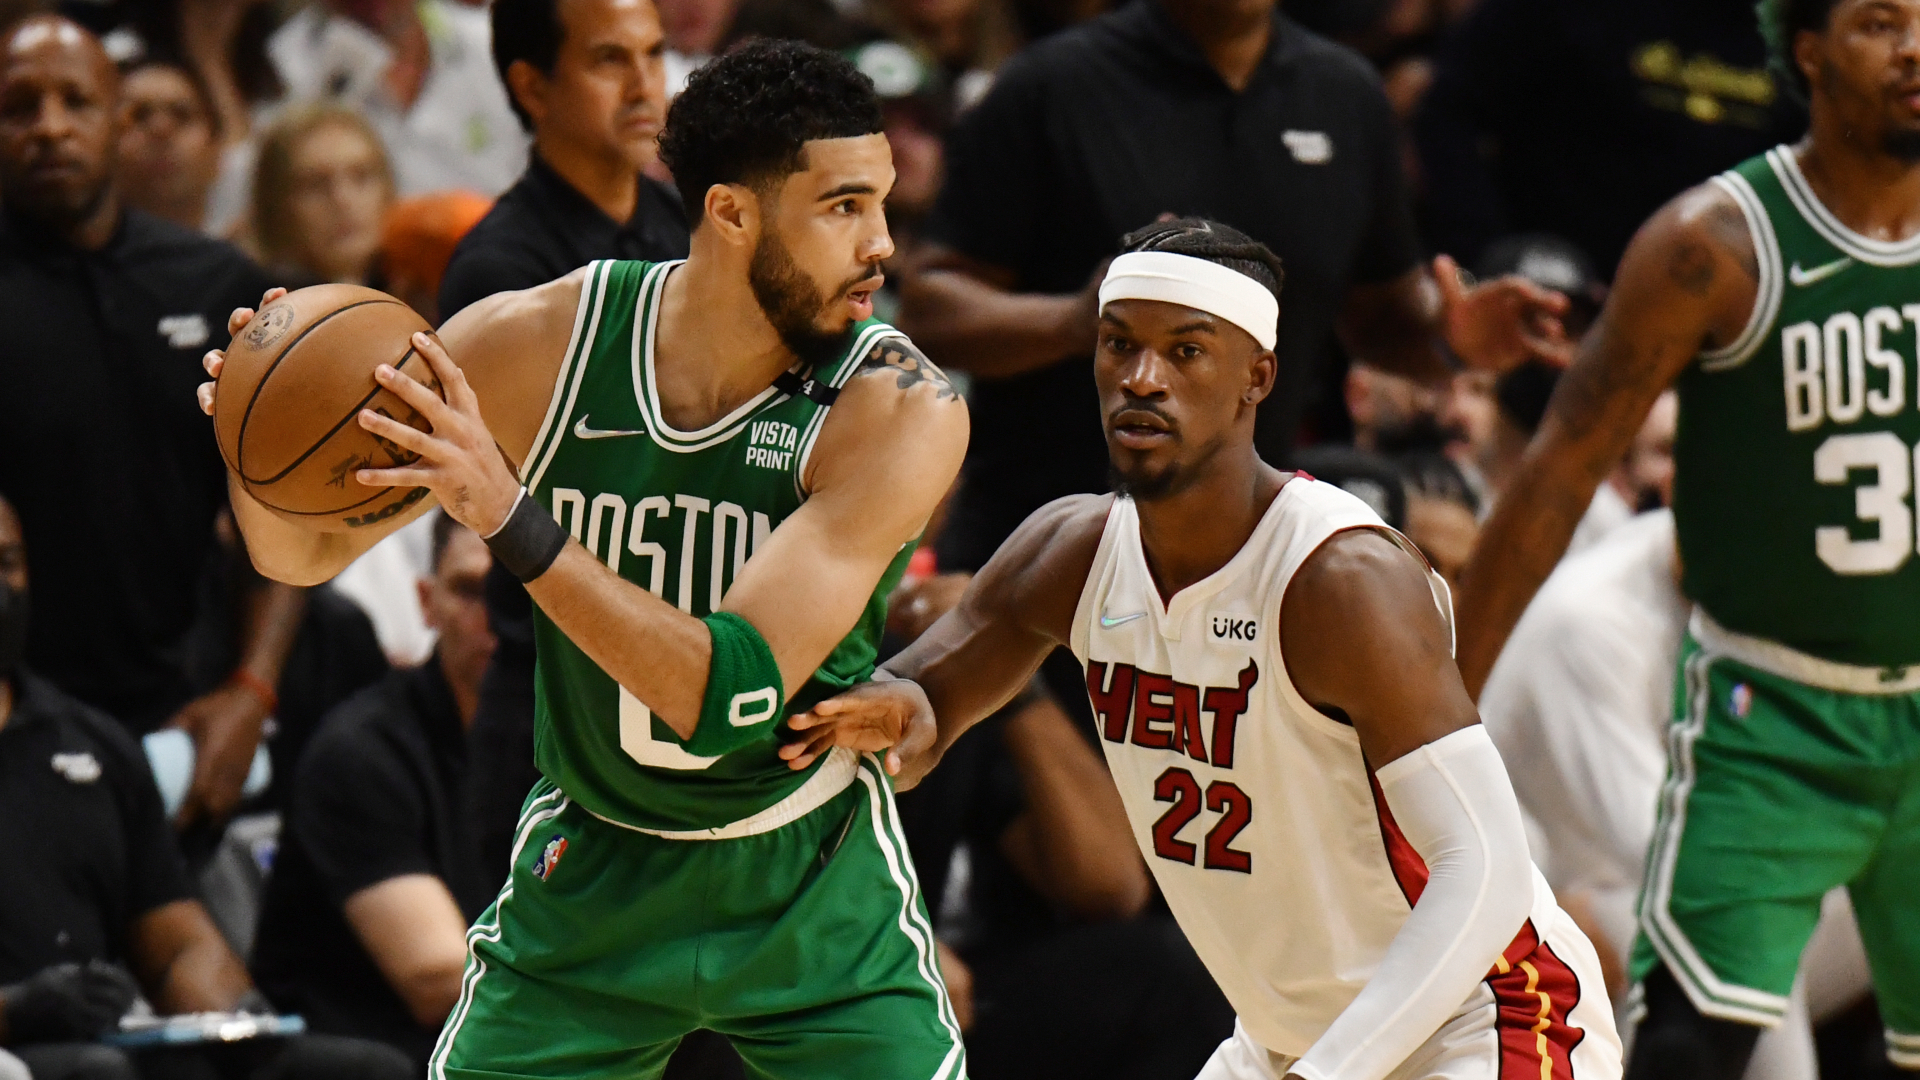 Celtics-Nets Game 5 live stream (4/25): How to watch NBA playoffs online,  TV, time 